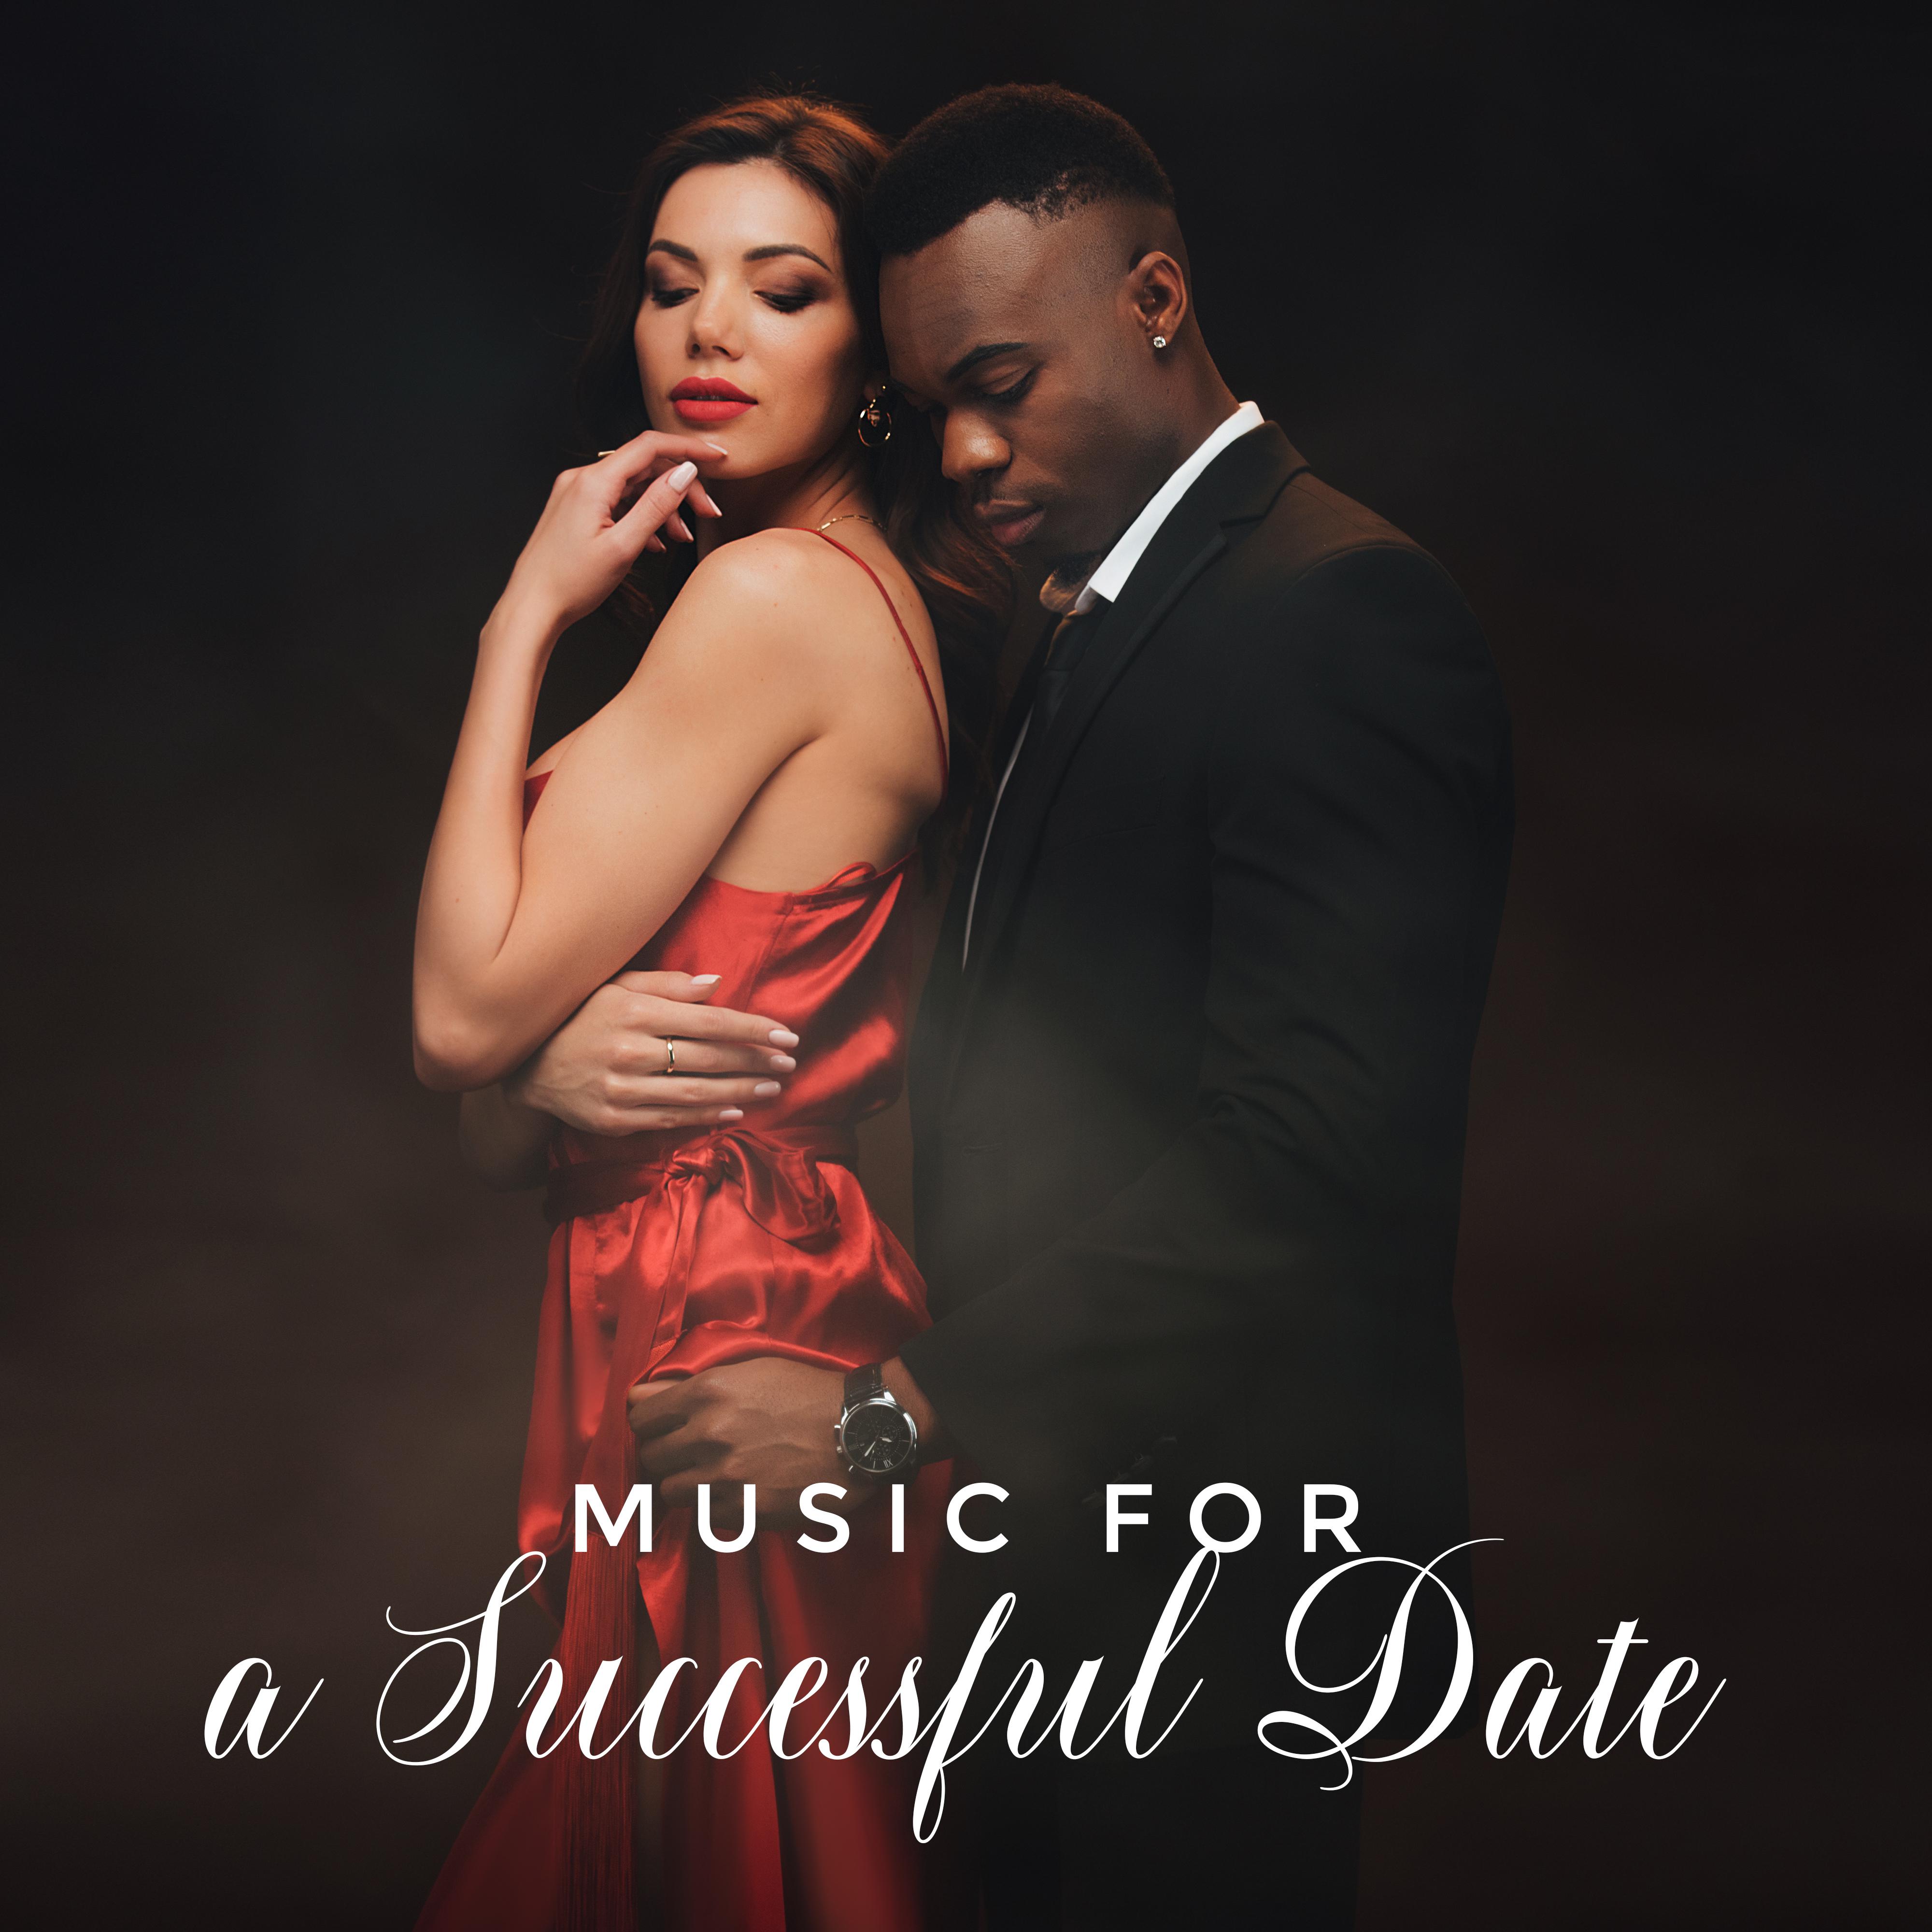 Music for a Successful Date - 15 Jazz Songs Introducing Sensual and Romantic Atmosphere